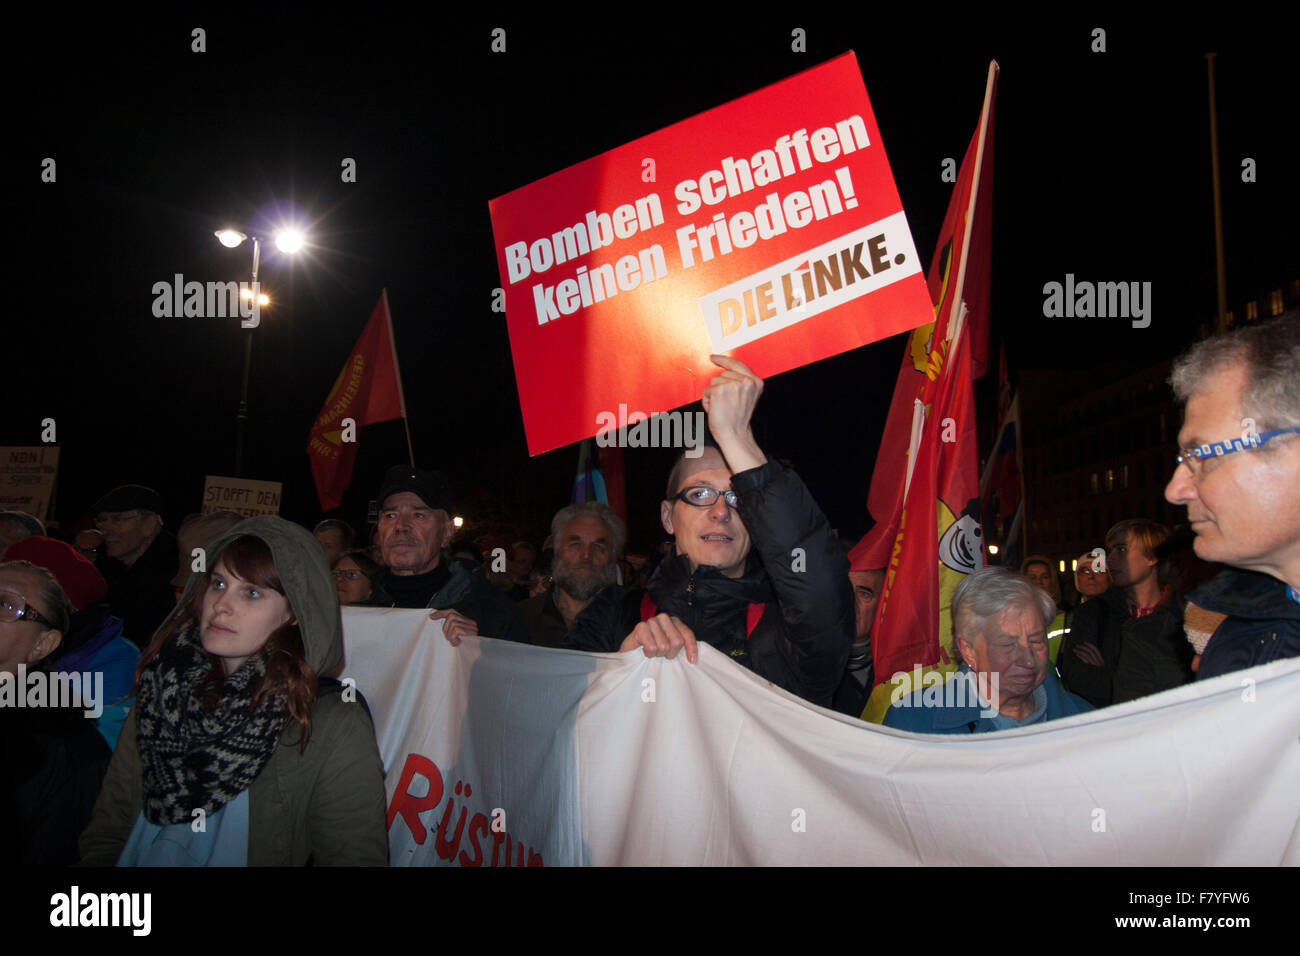 Berlin, Germany. 3rd December, 2015. Demonstration against German military intervention in Syria. 'Bombs don't bring peace' Stock Photo